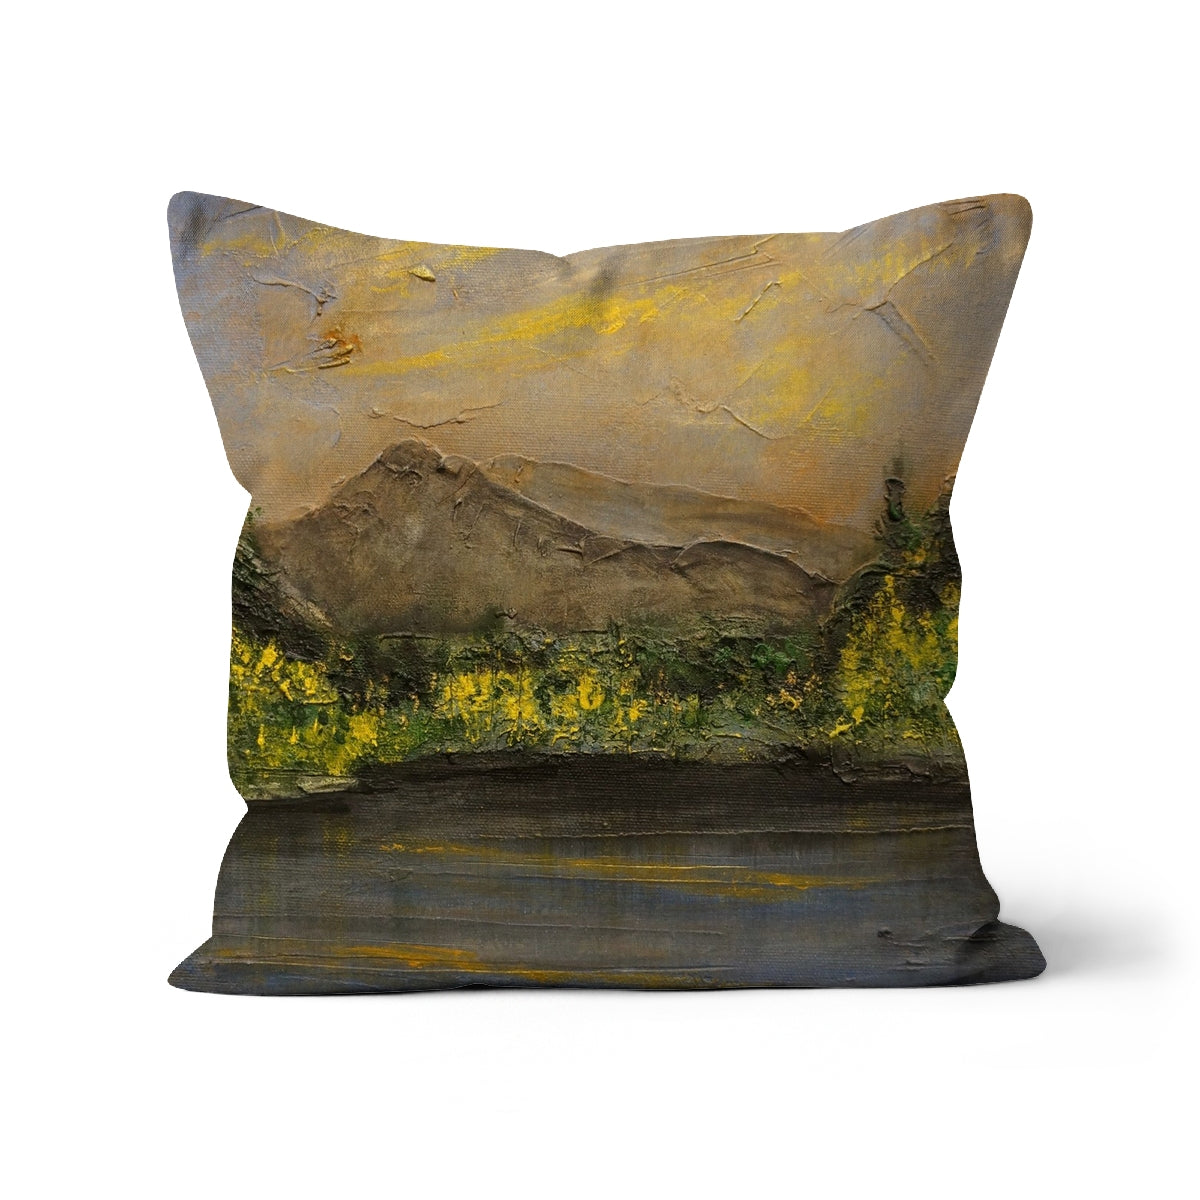 Glencoe Lochan Dusk Art Gifts Cushion-Cushions-Scottish Lochs & Mountains Art Gallery-Faux Suede-12"x12"-Paintings, Prints, Homeware, Art Gifts From Scotland By Scottish Artist Kevin Hunter